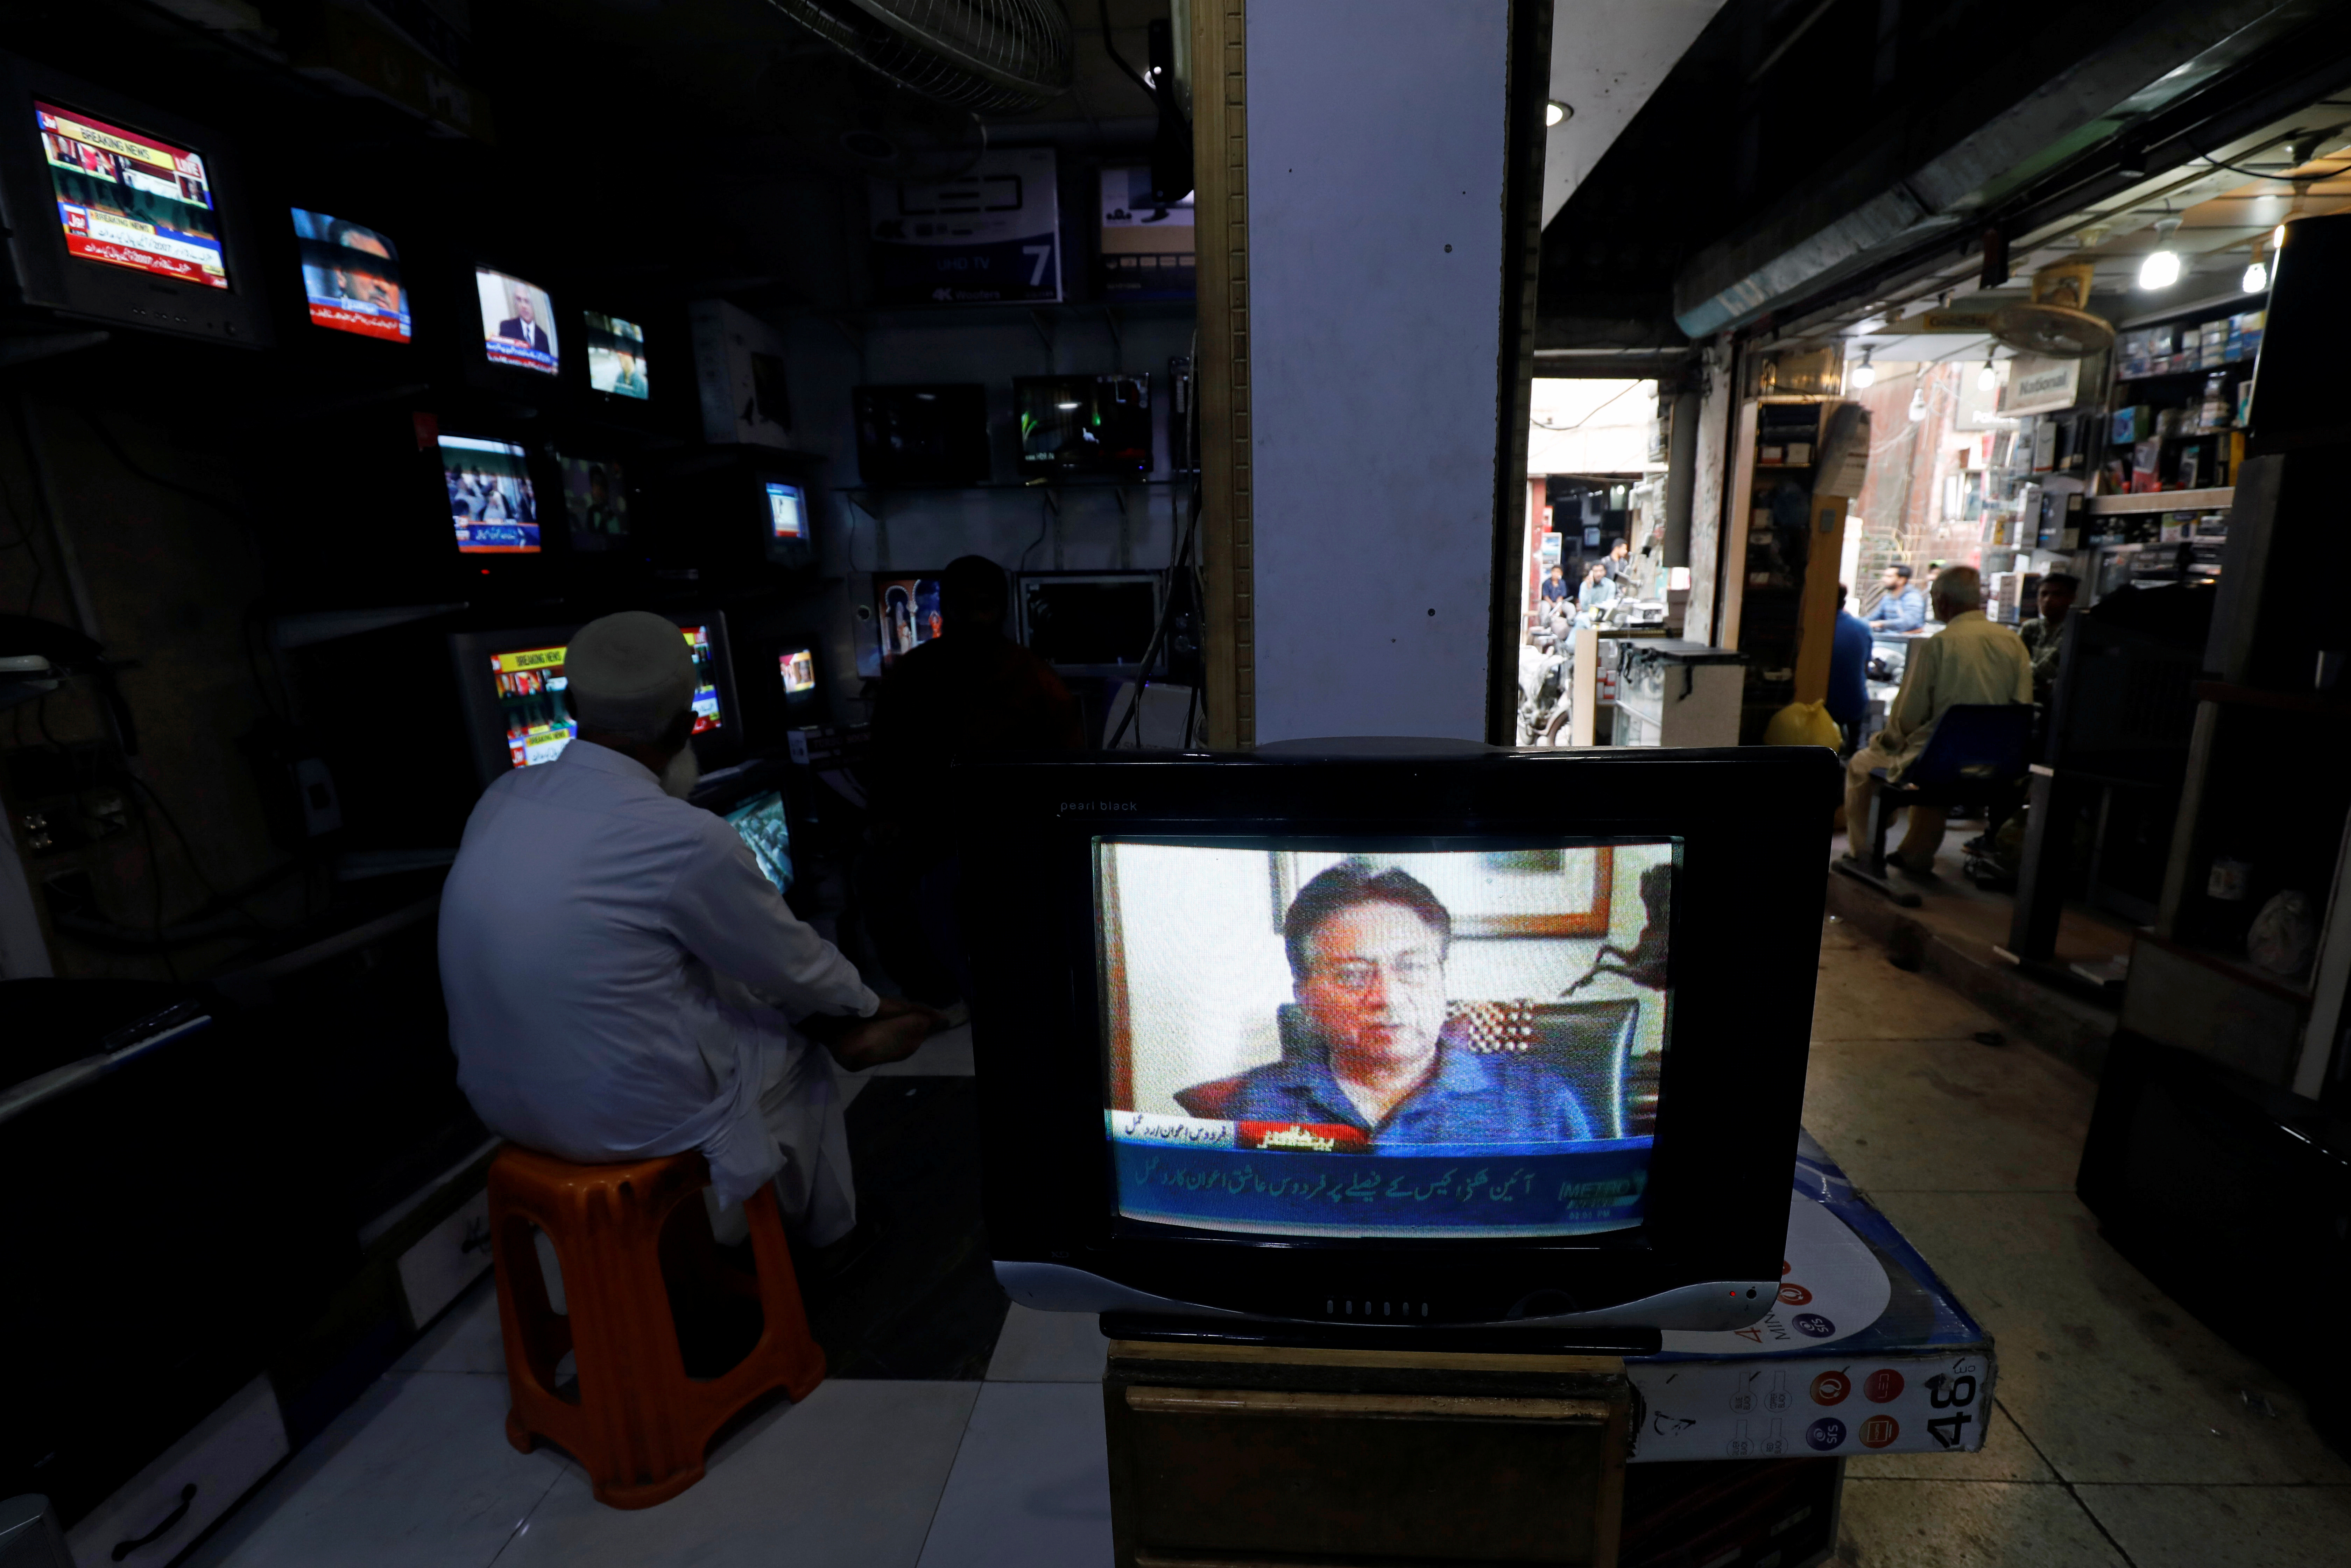 A television screen displays the news after Pakistani court sentenced former military ruler Pervez Musharraf to death on charges of high treason and subverting the constitution, at a shop in Karachi